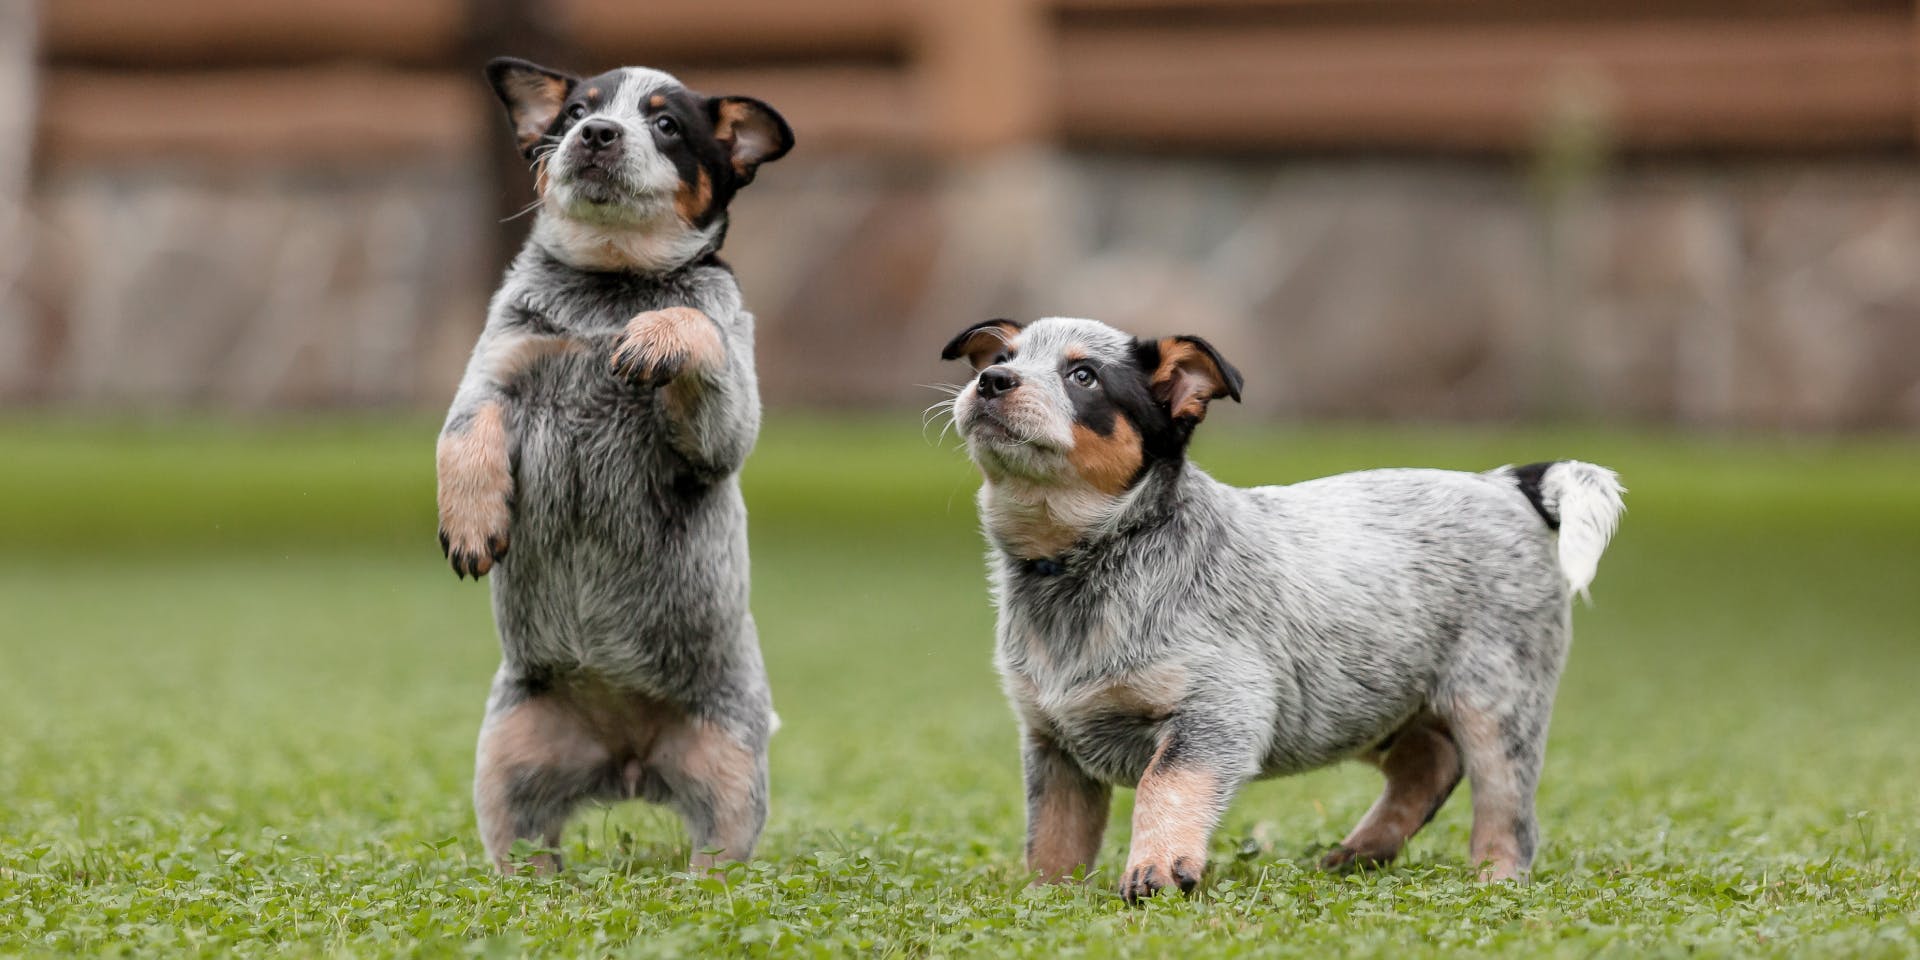 Two cute Blue Heeler puppies playing together.